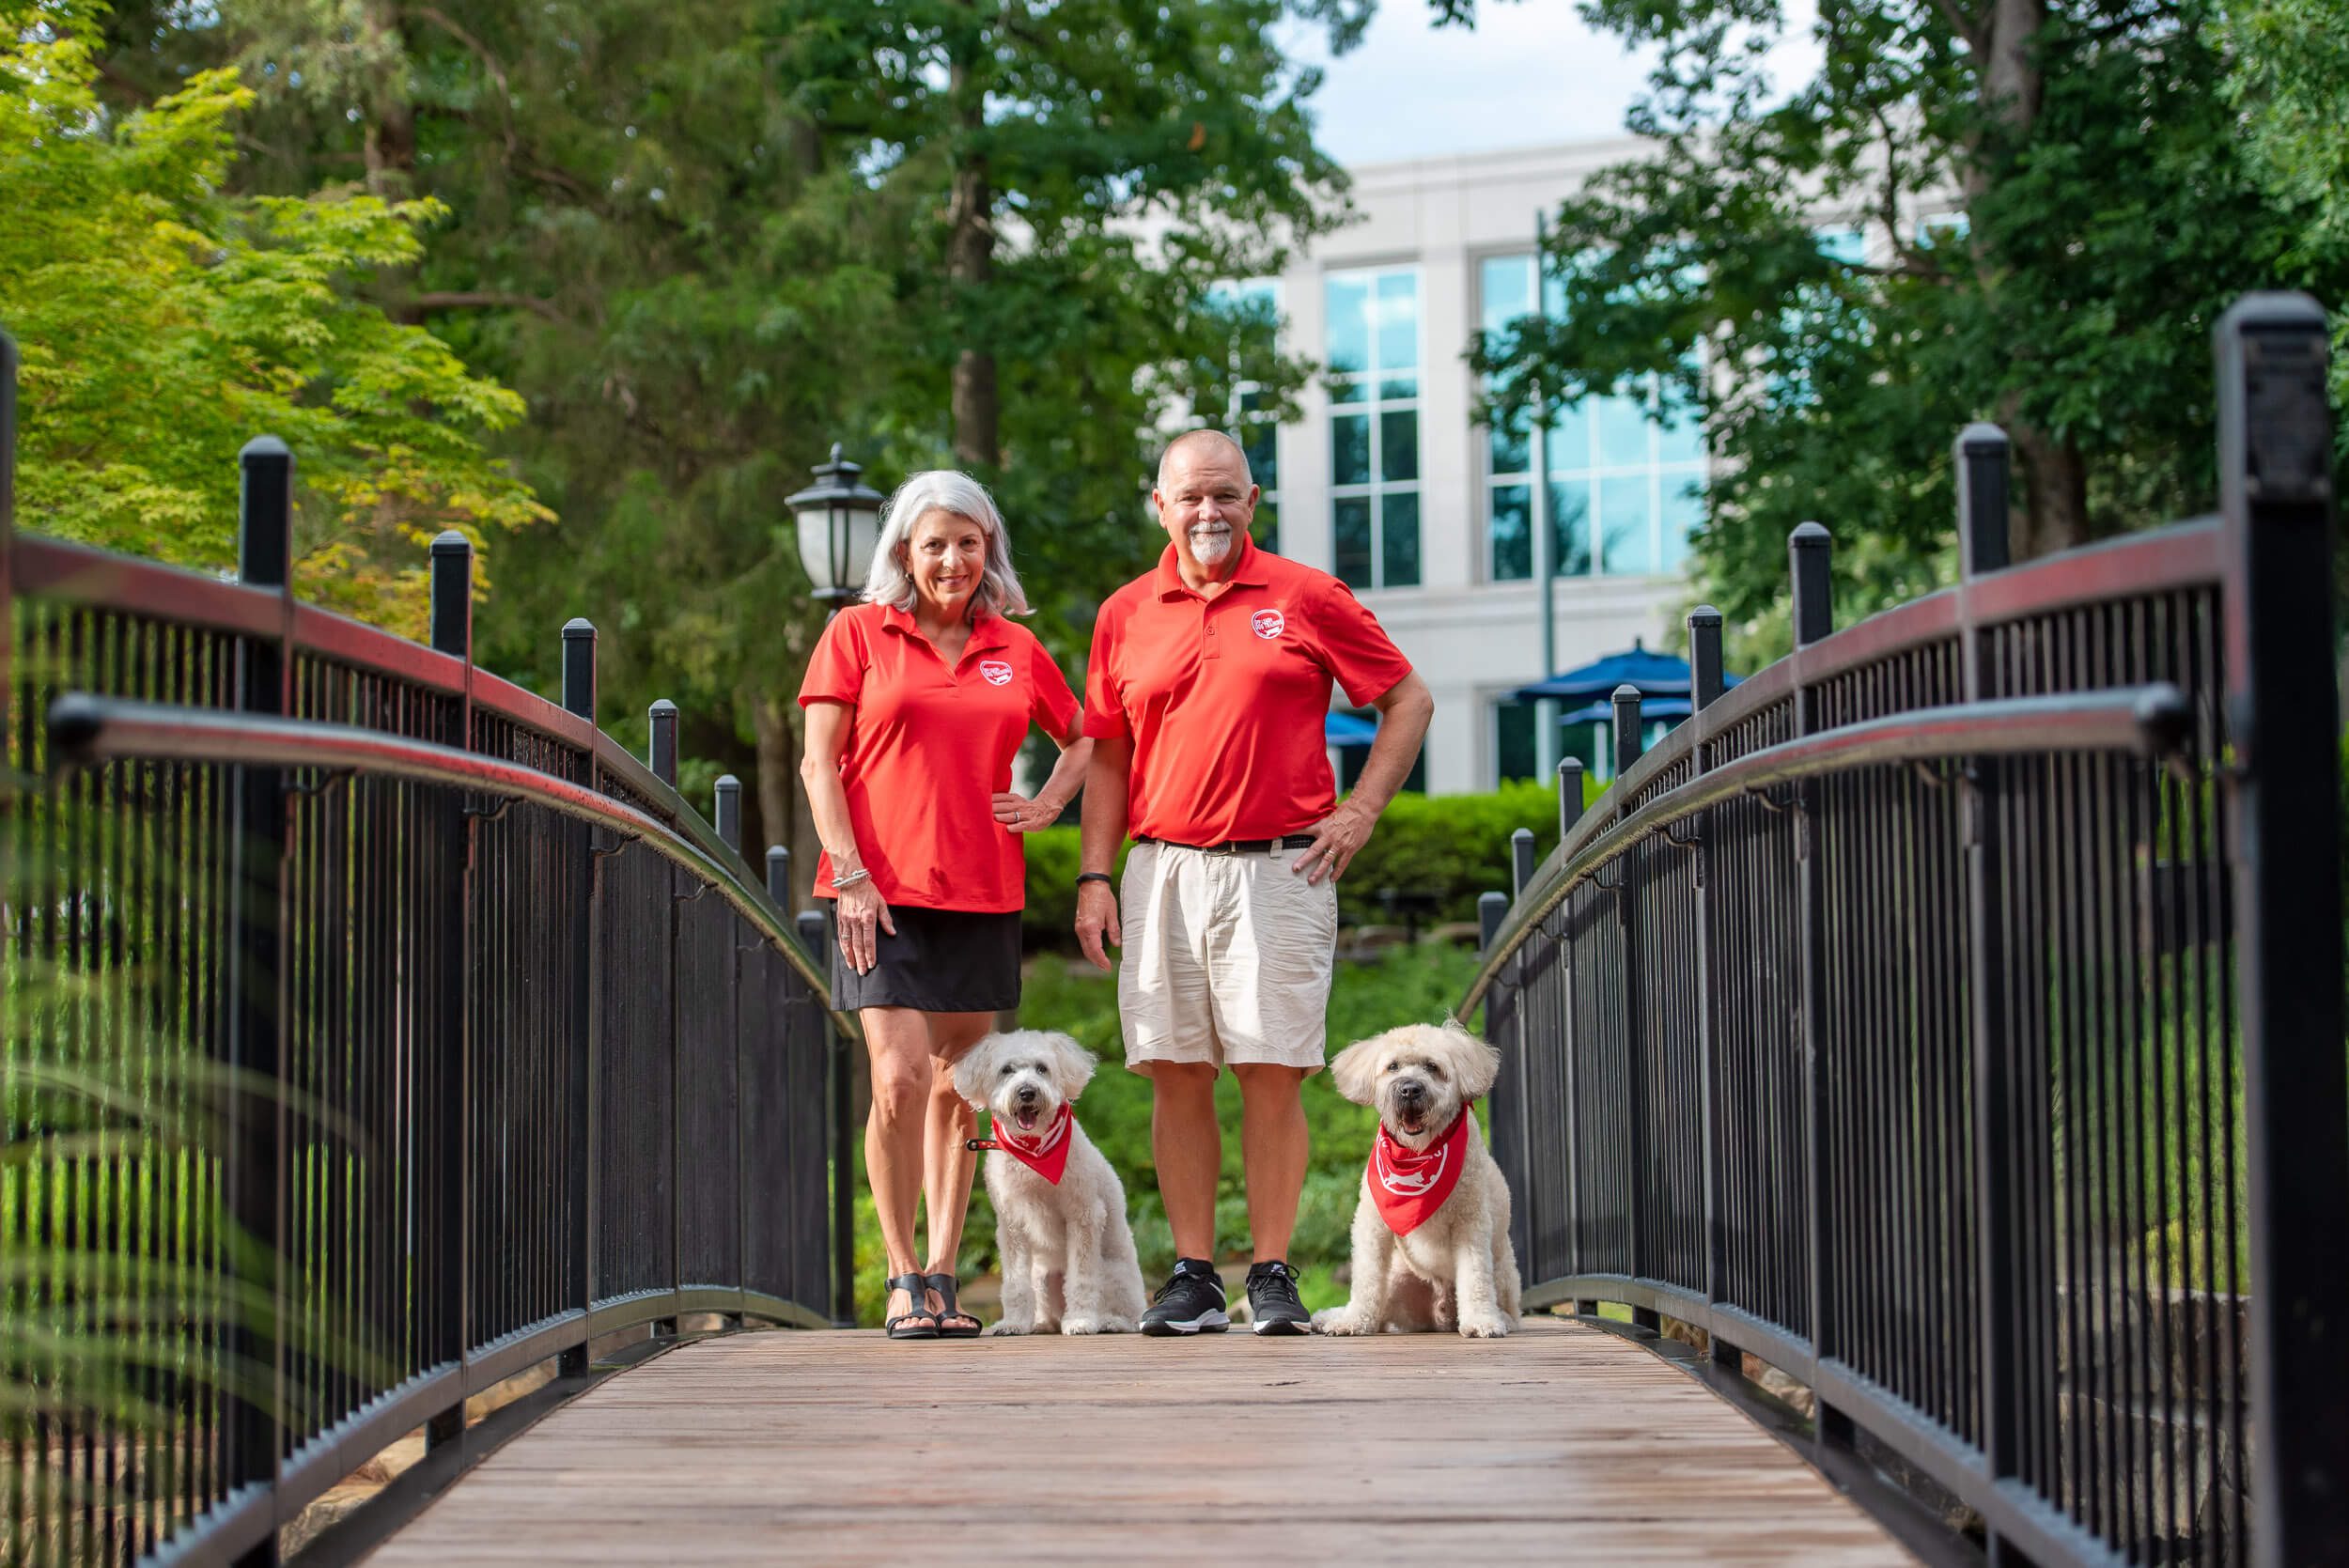 Off Leash Dog Training co-owners Jan and Russ standing on bridge with their two dogs in Charlotte, NC